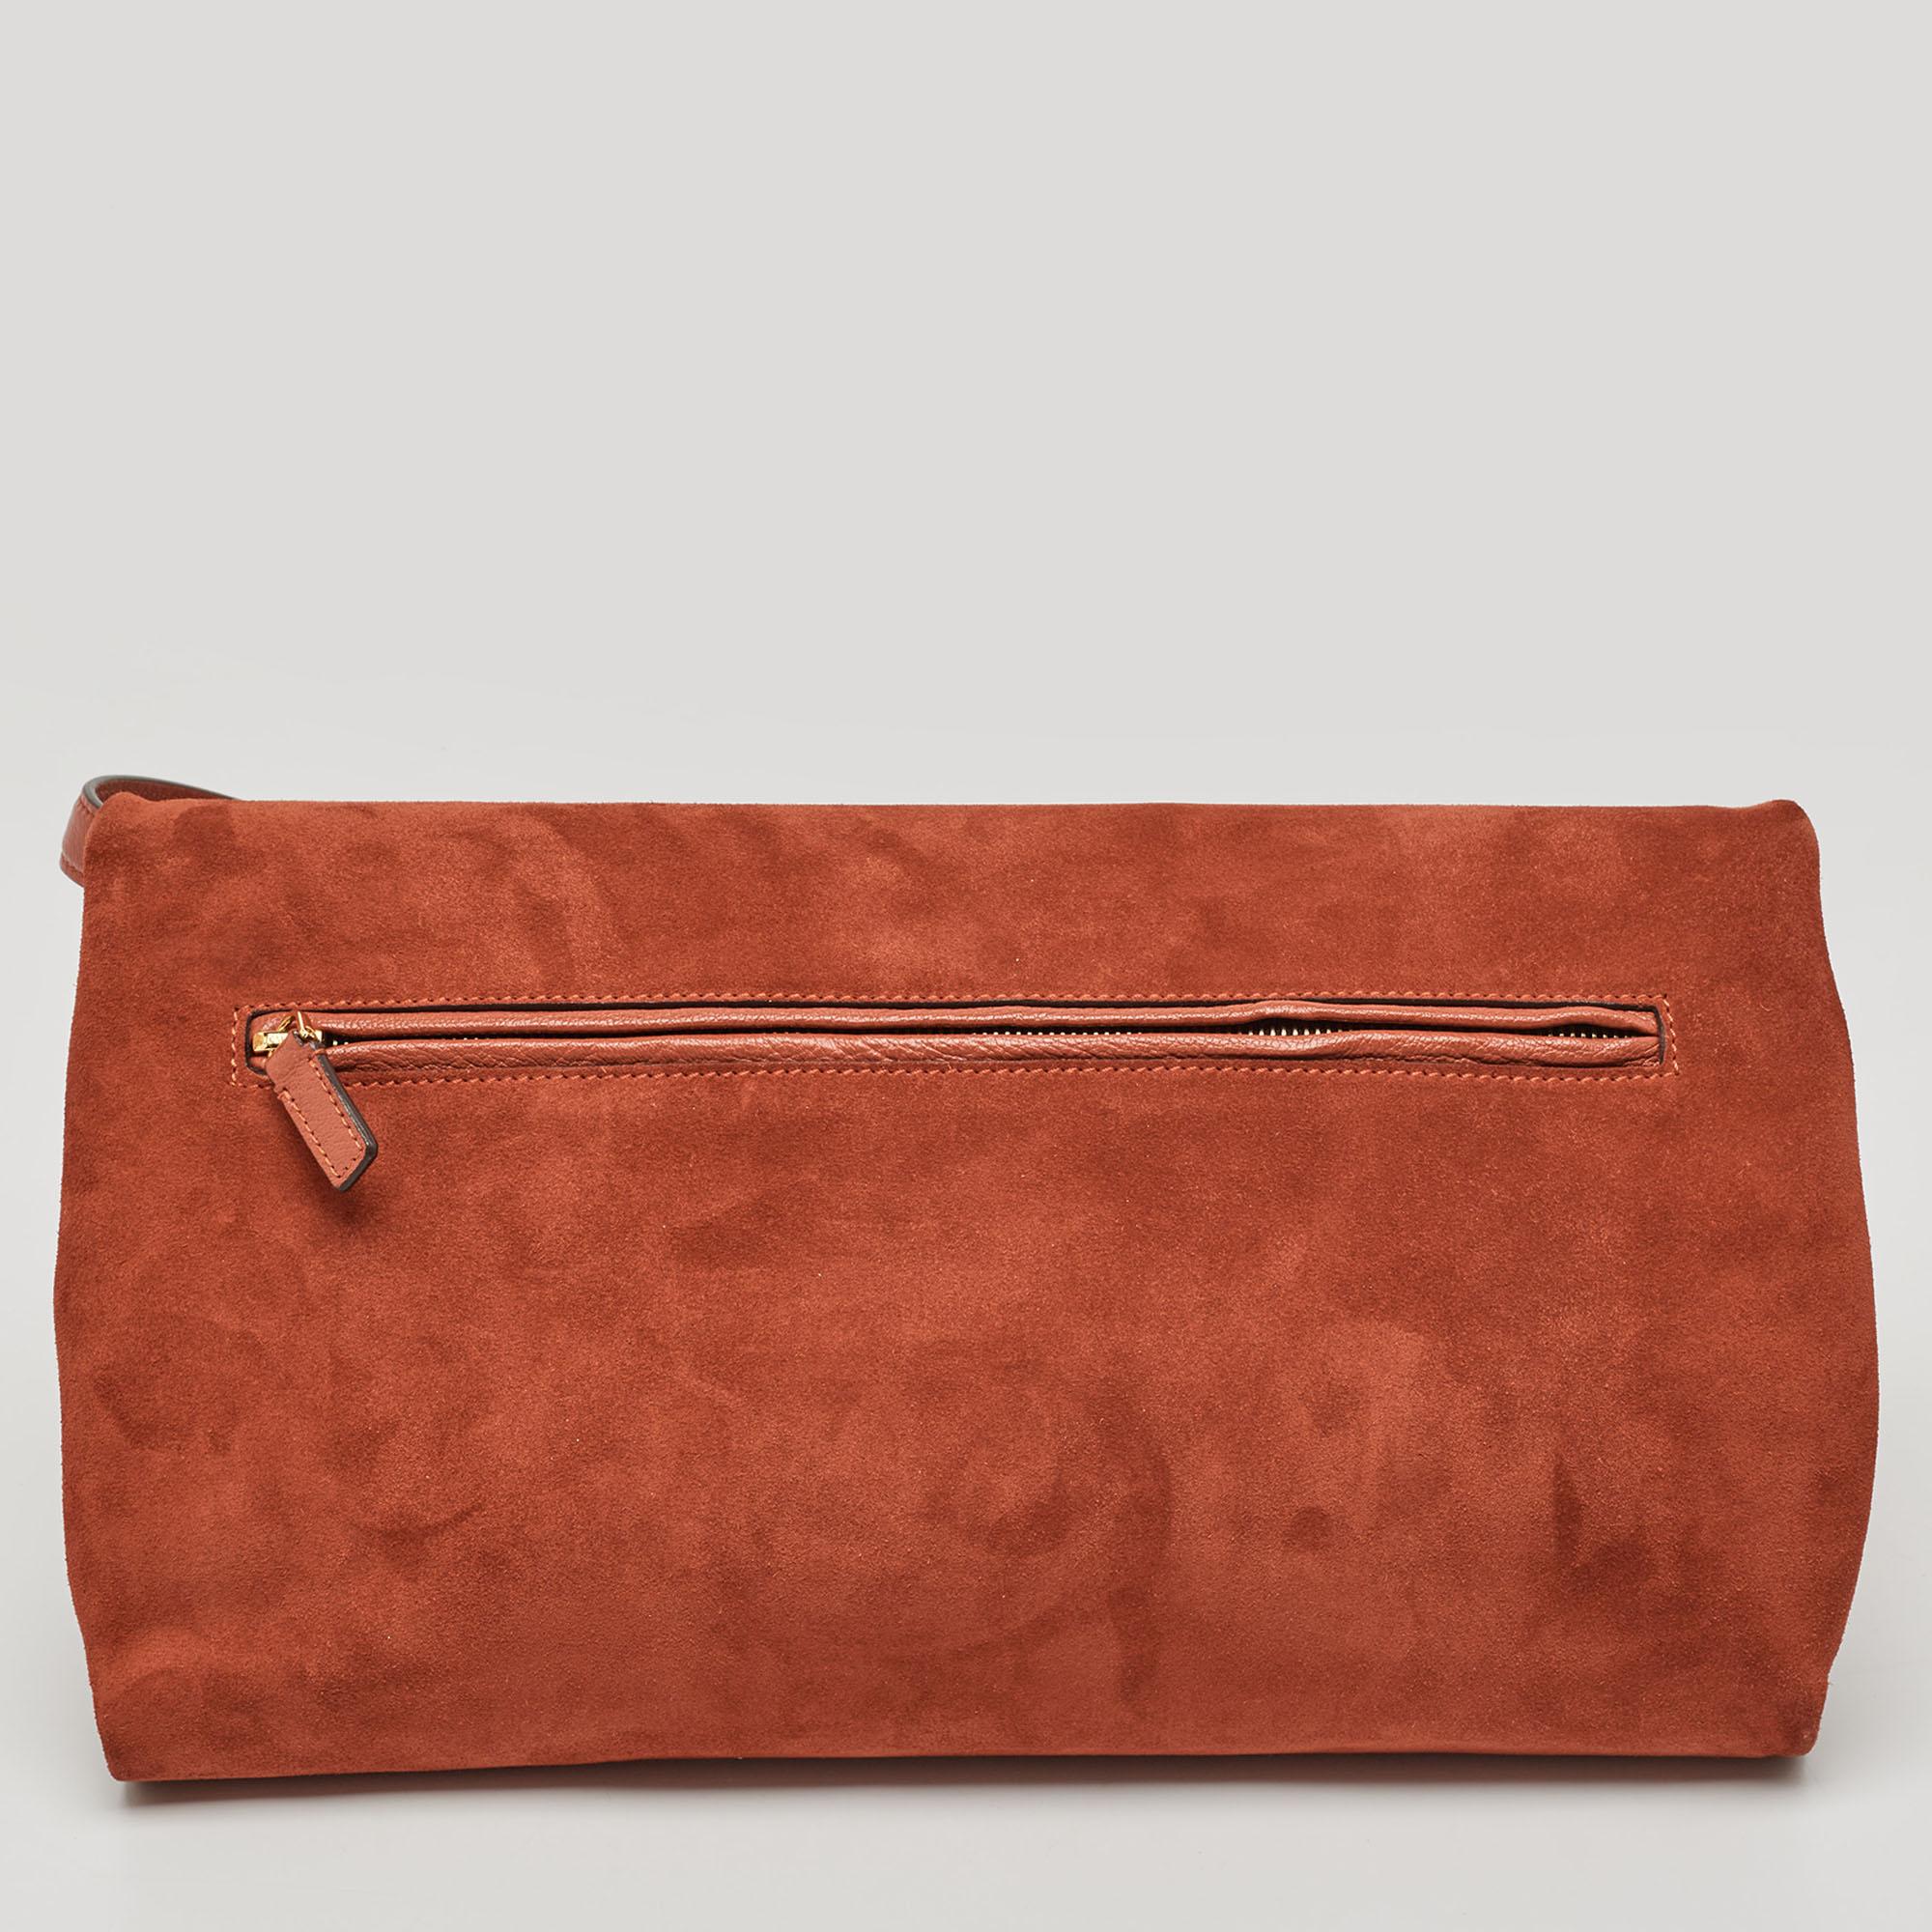 Functional and fashionable, this clutch is a classy styling choice. It is crafted from quality materials, and its lined interior will keep your evening essentials in a neat way.

Includes: Original Dustbag

